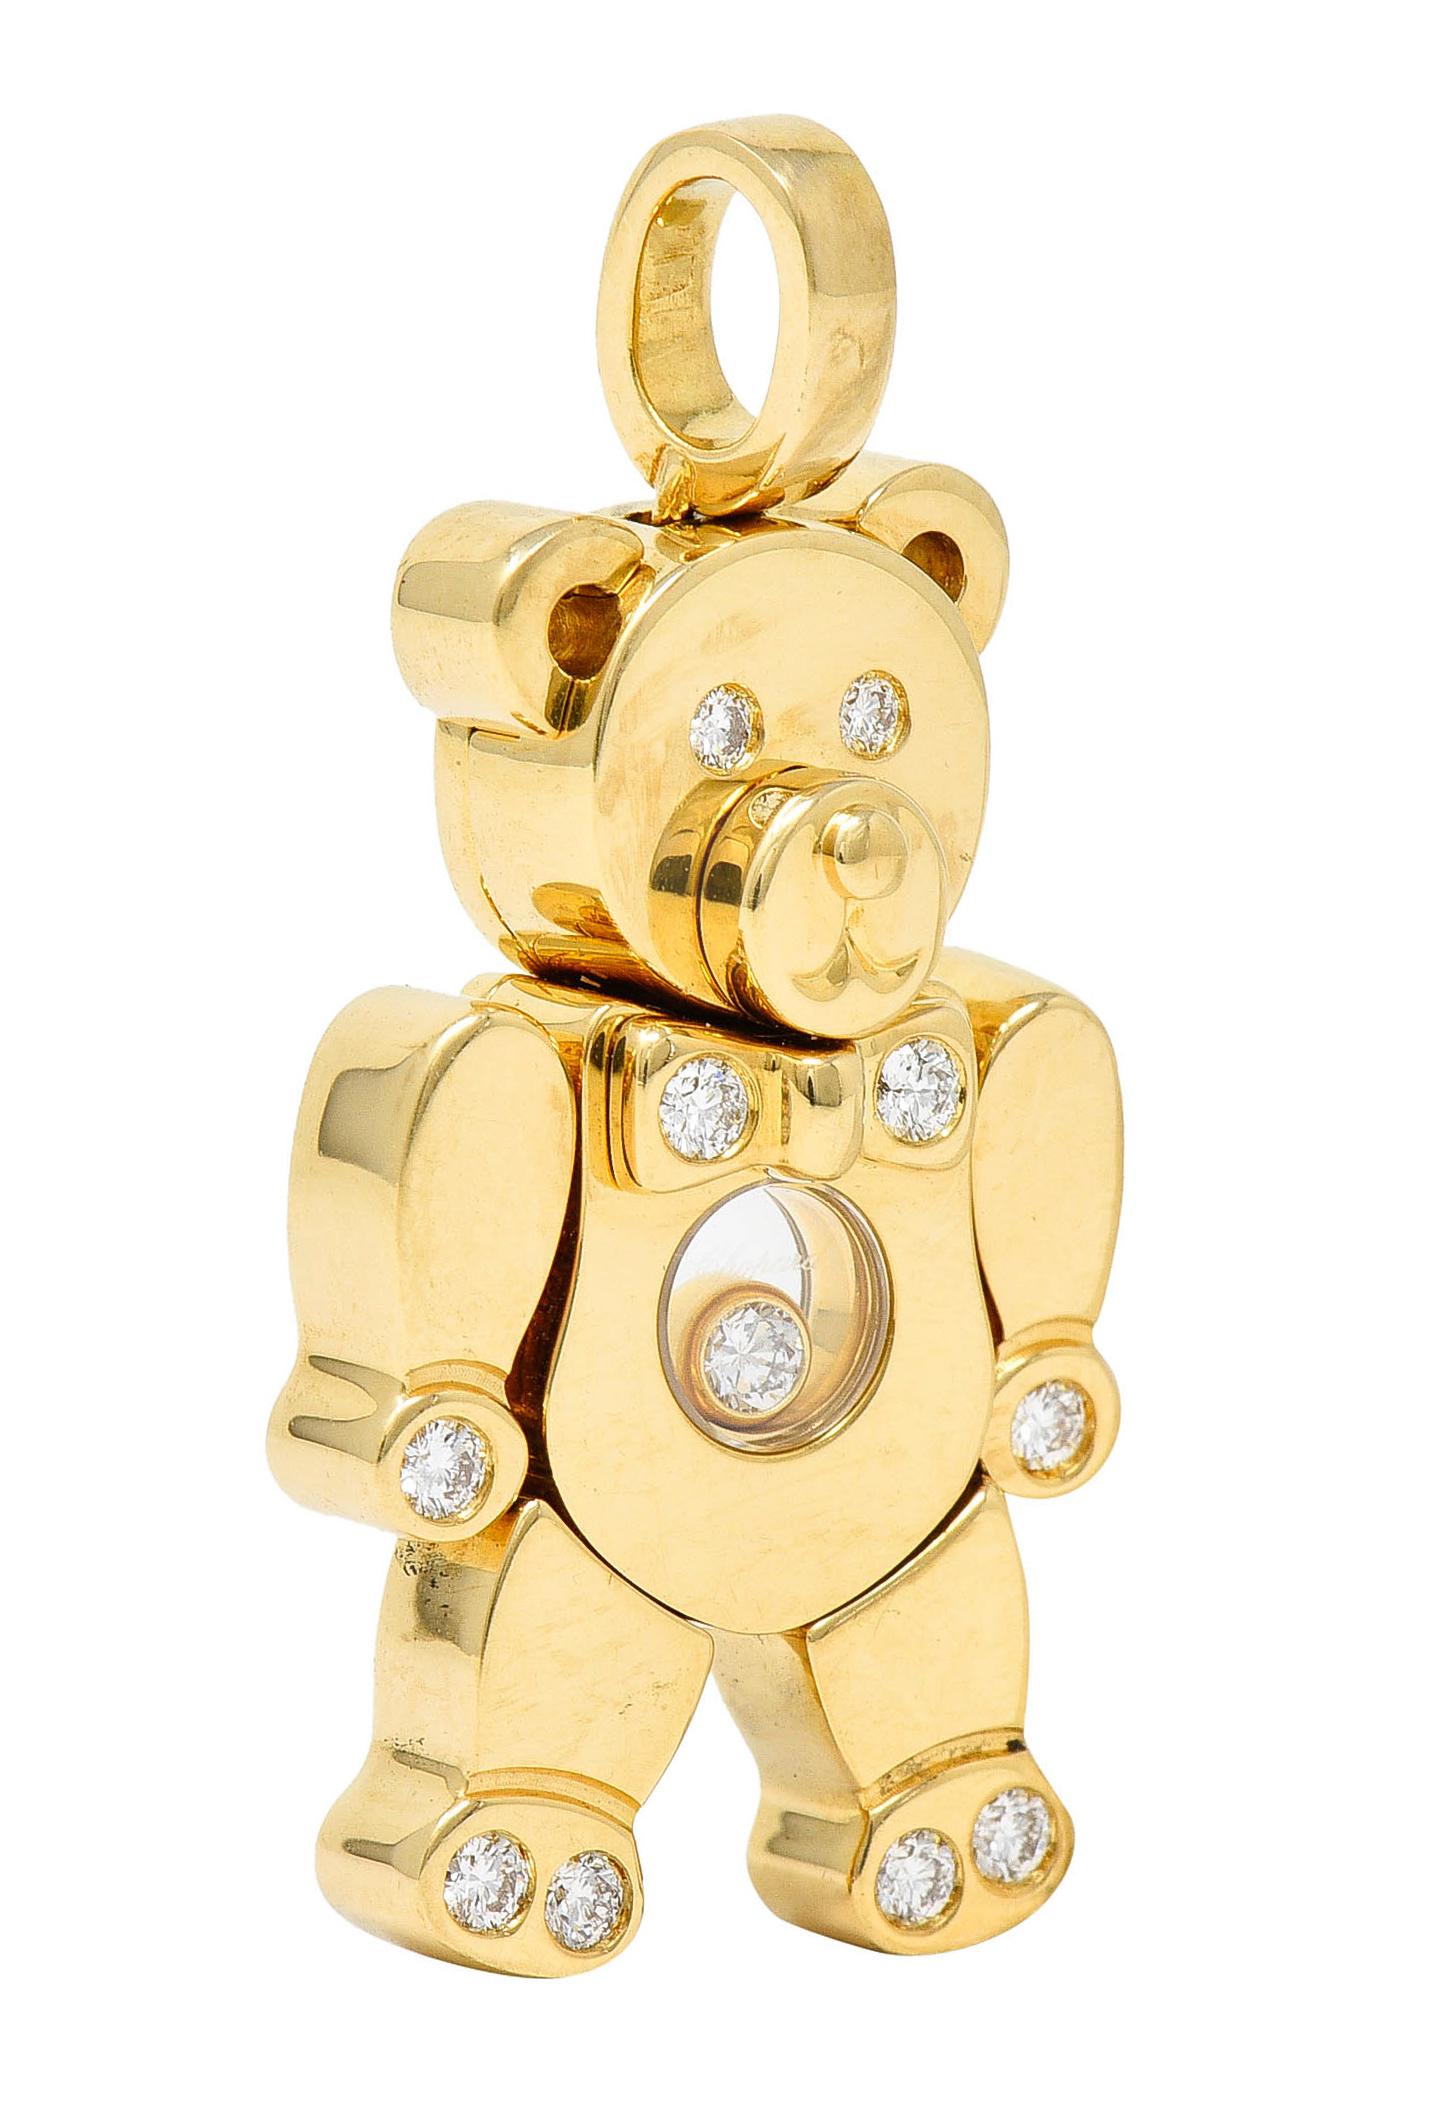 Pendant is a teddy bear design - stylized and with a bow tie

Limbs slightly articulate and are accented by flush set round brilliant cut diamonds

Body's center is glass covered and features a floating bezel set diamond

Total diamond weight is